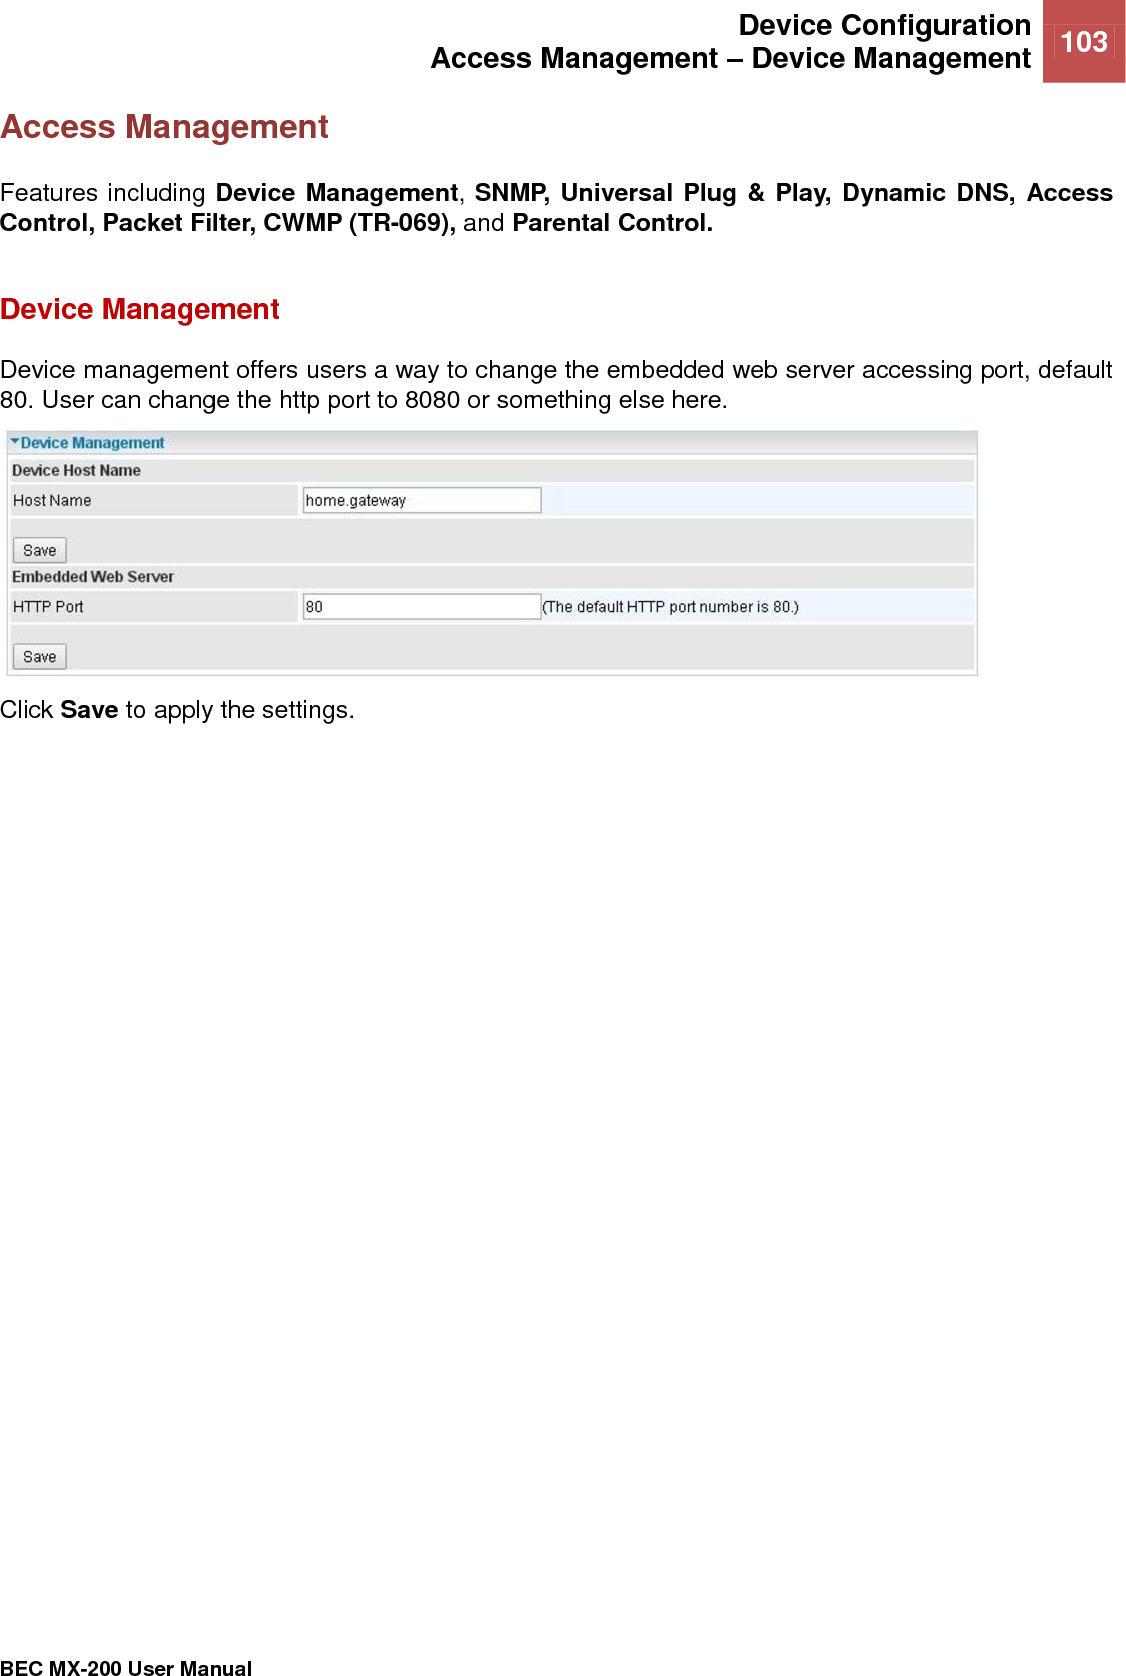  Device Configuration Access Management – Device Management 103   BEC MX-200 User Manual  Access Management Features including Device Management, SNMP, Universal Plug &amp; Play, Dynamic DNS, Access Control, Packet Filter, CWMP (TR-069), and Parental Control.  Device Management Device management offers users a way to change the embedded web server accessing port, default 80. User can change the http port to 8080 or something else here.  Click Save to apply the settings.    